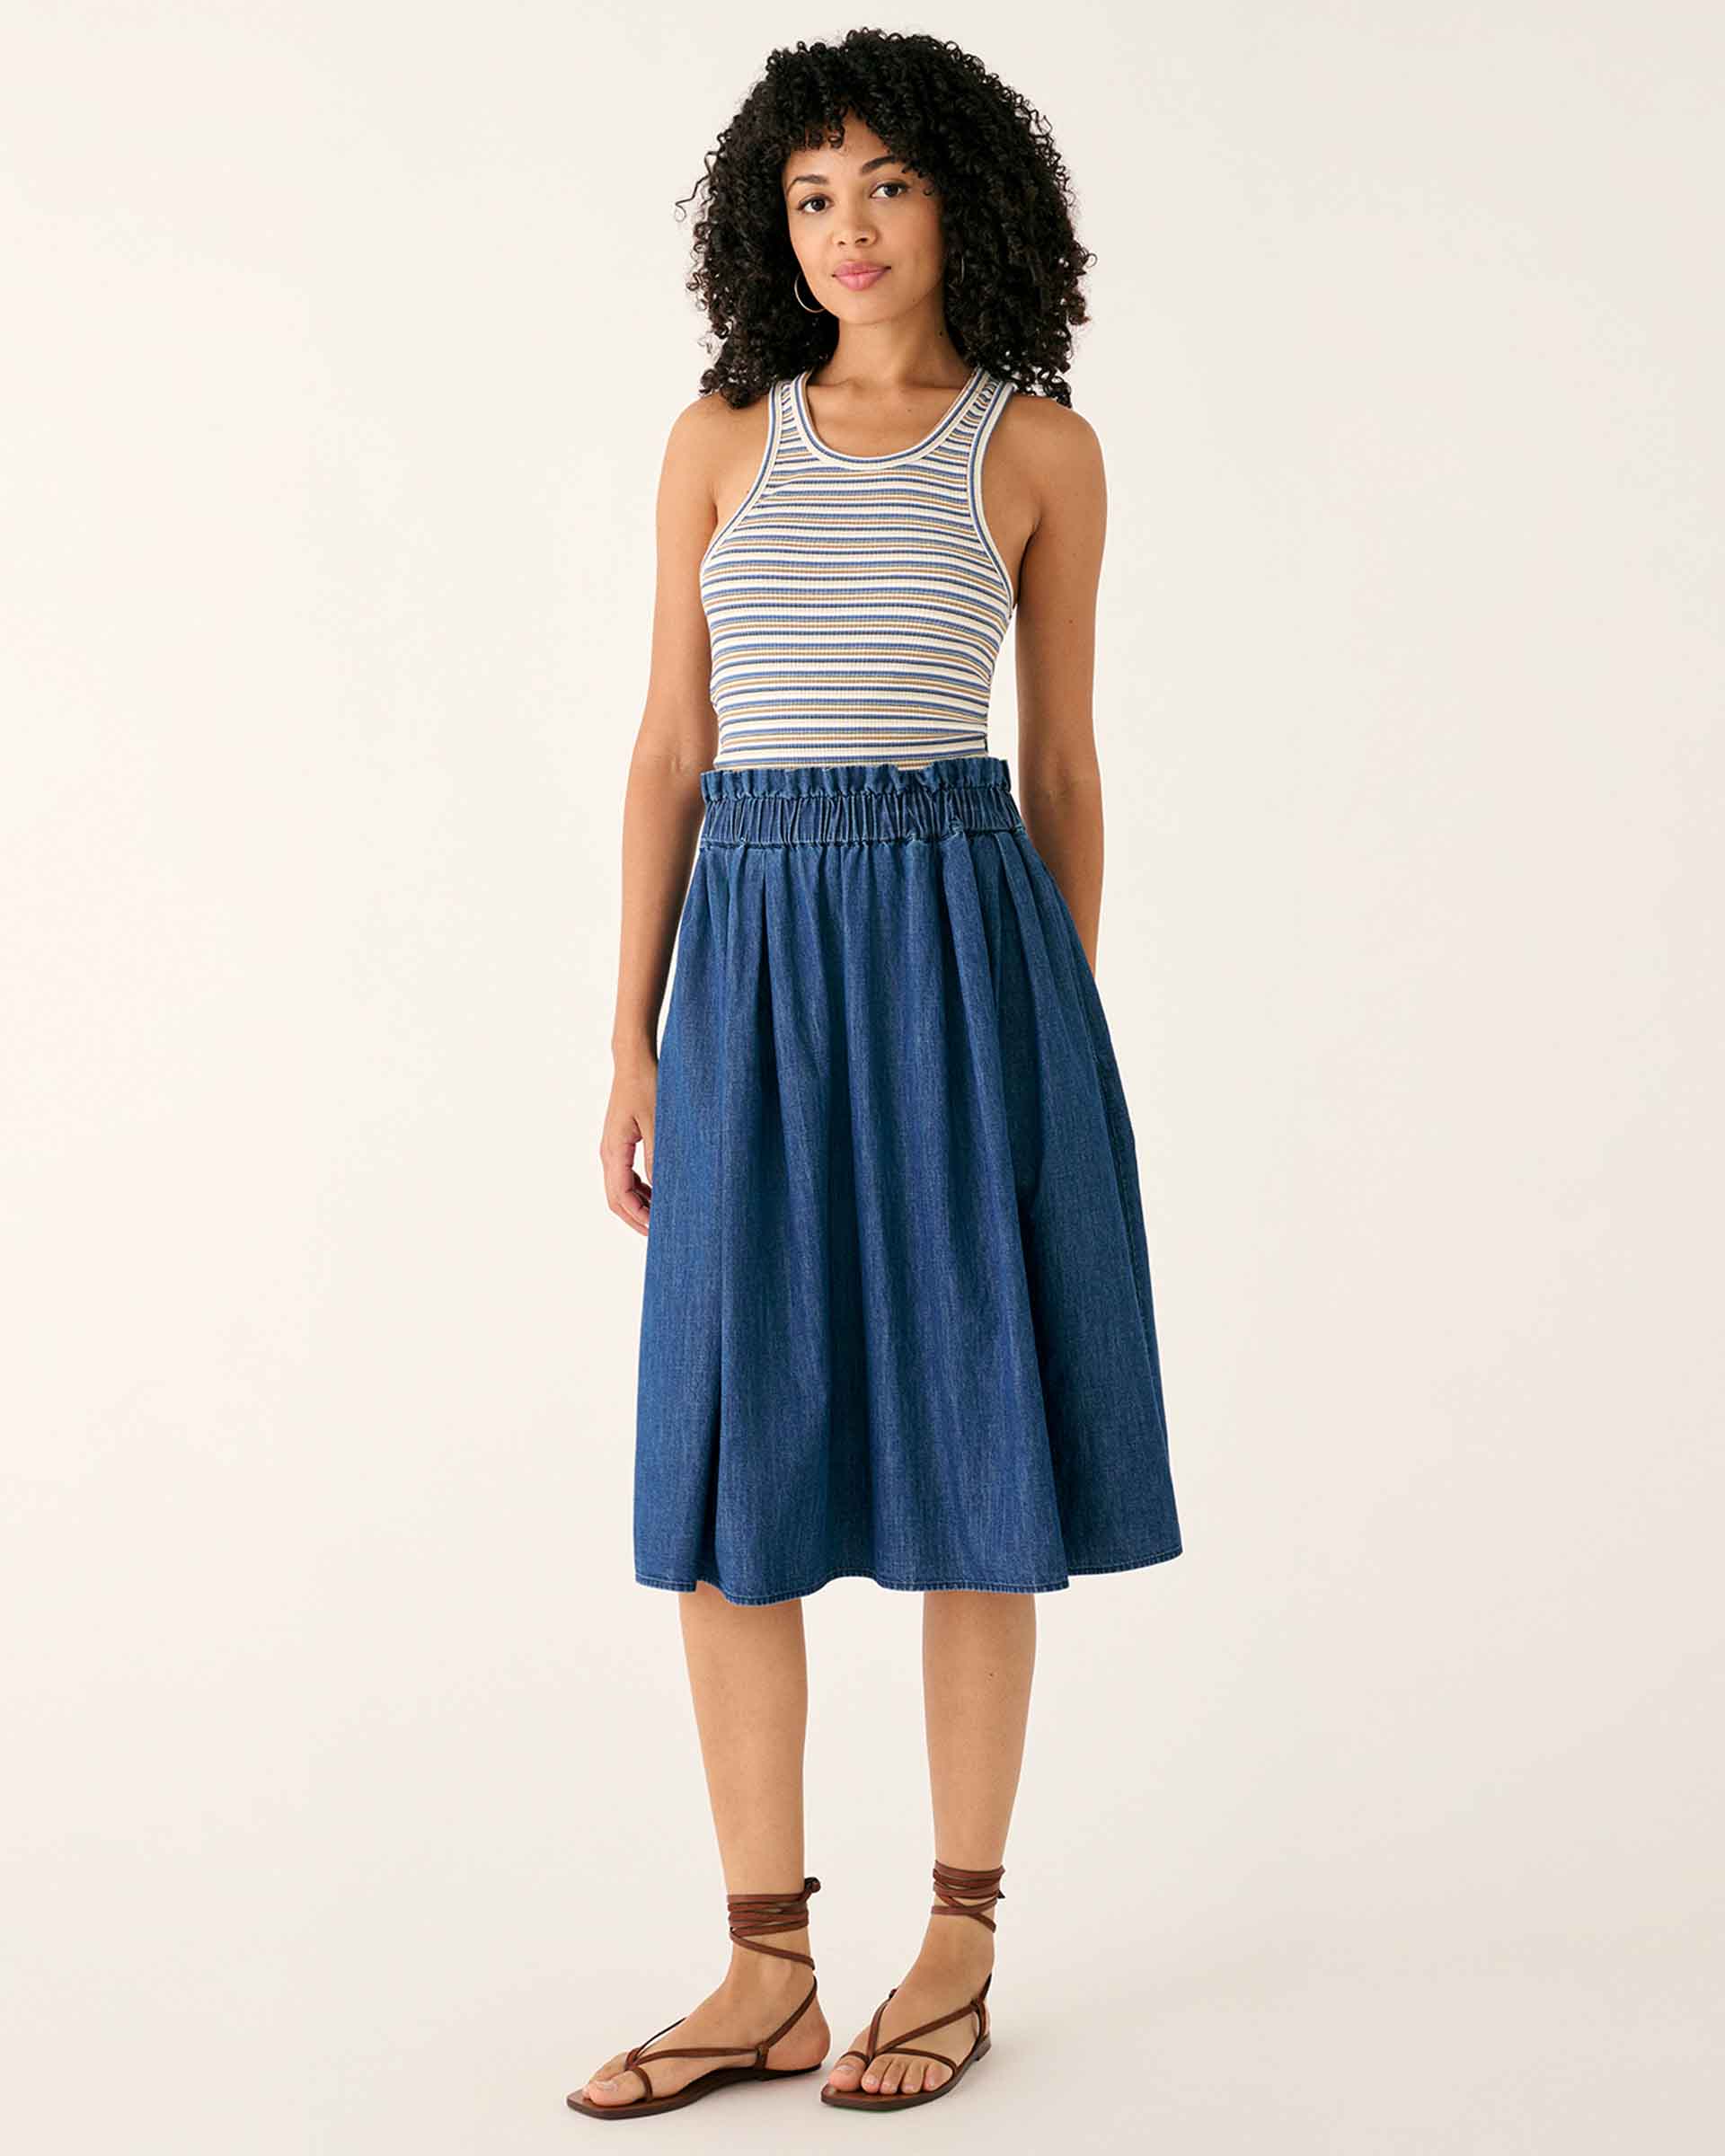 female wearing chambray midi A-line skirt with elastic waist standing on a white background